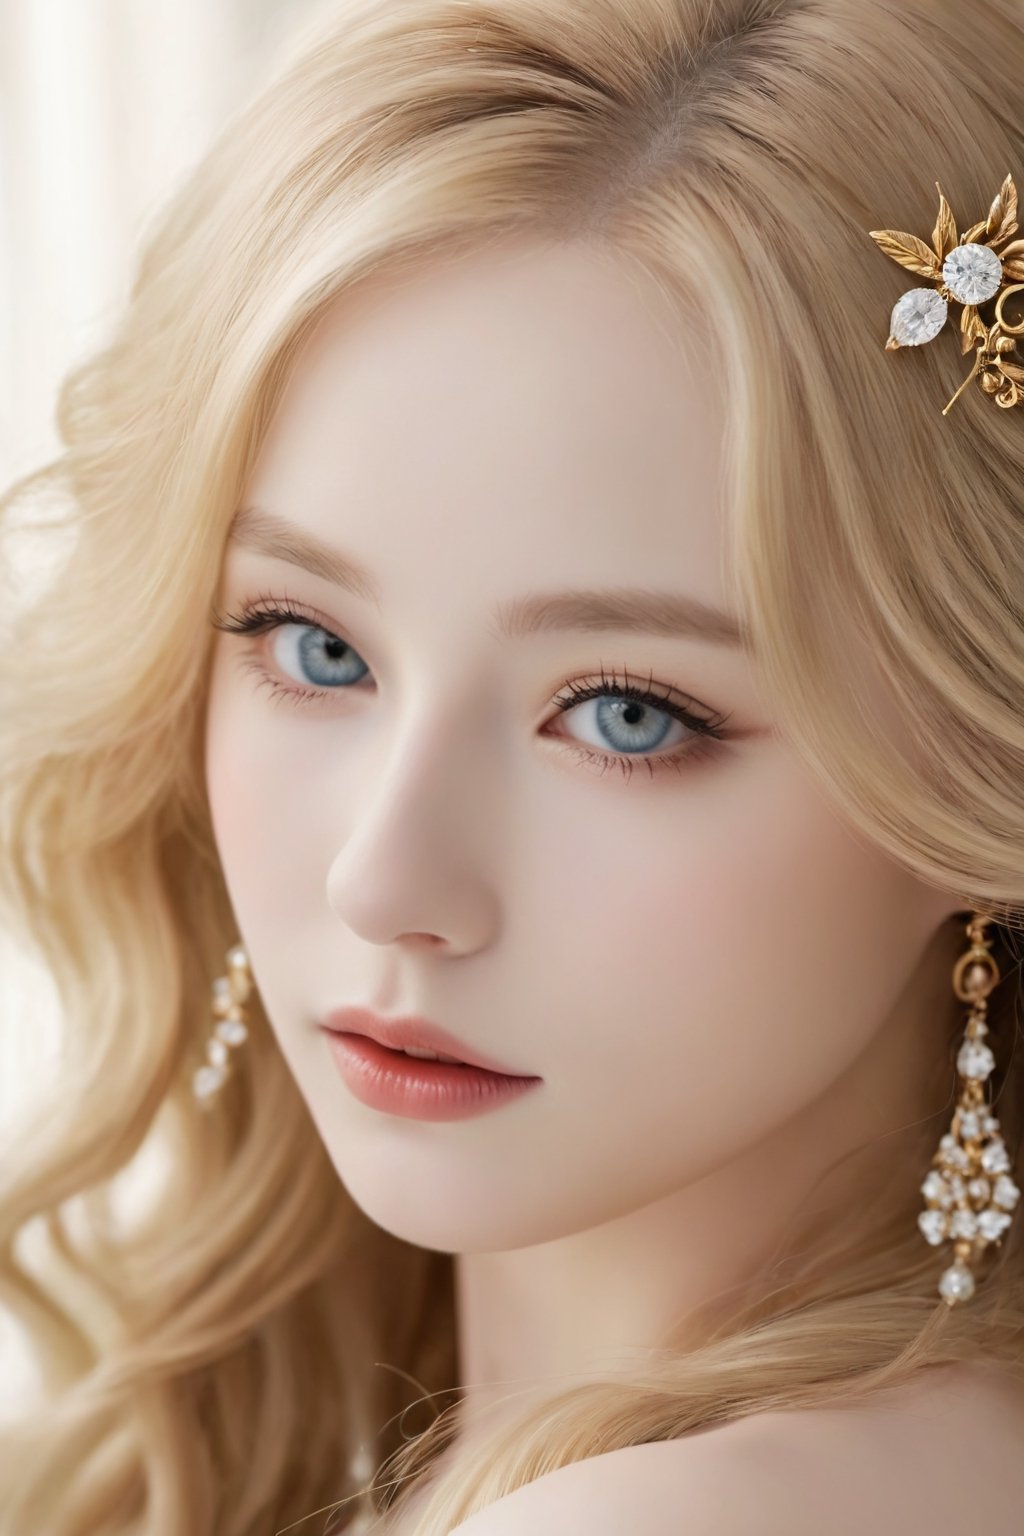 She was a vision of elegance and grace, with flowing golden locks framing her porcelain complexion. Her eyes sparkled like diamonds, reflecting a depth of wisdom beyond her years. Every movement exuded a natural charm and confidence, captivating all who were fortunate enough to catch a glimpse of her.